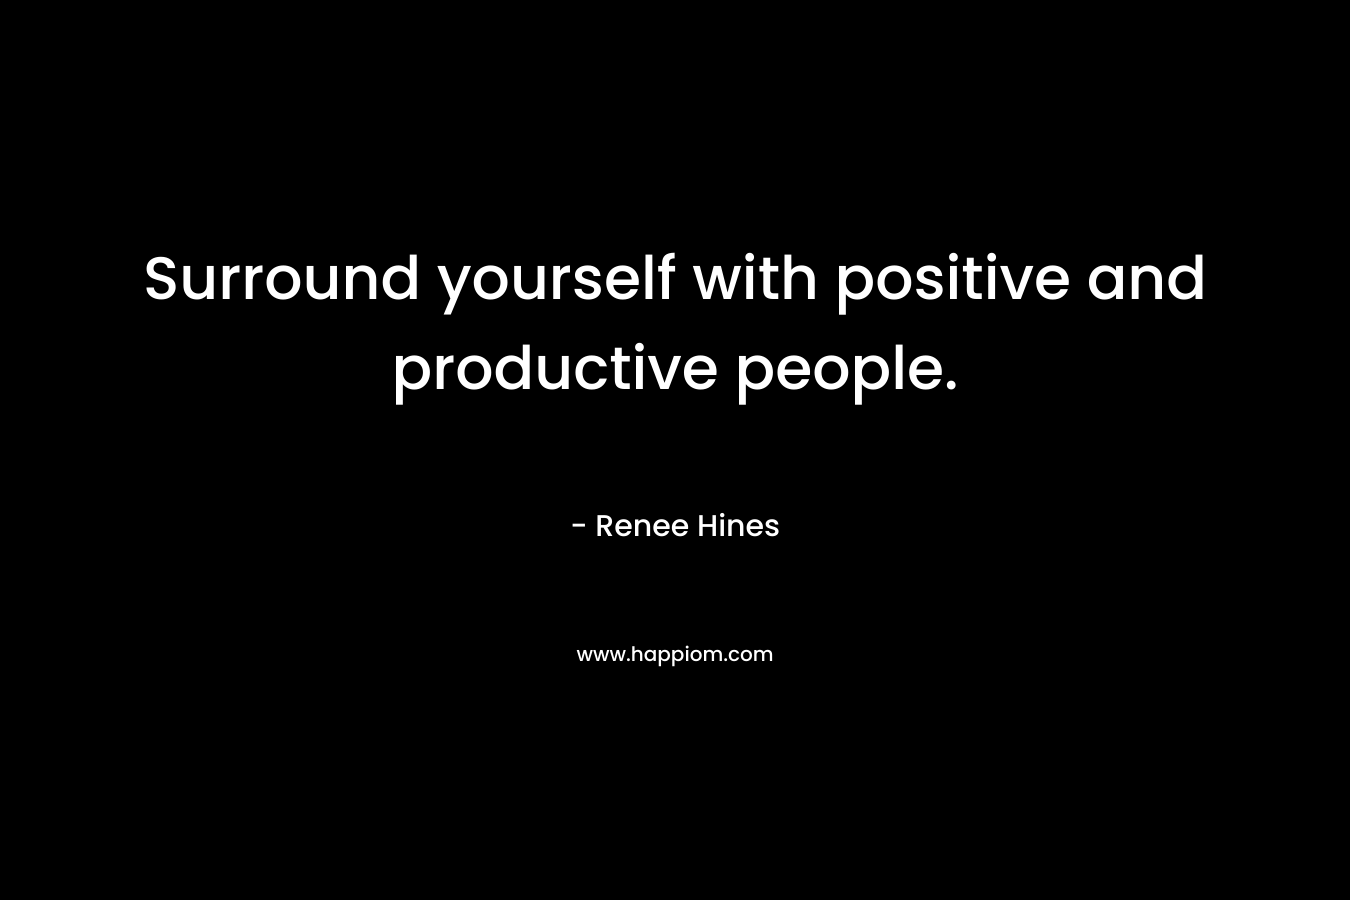 Surround yourself with positive and productive people.